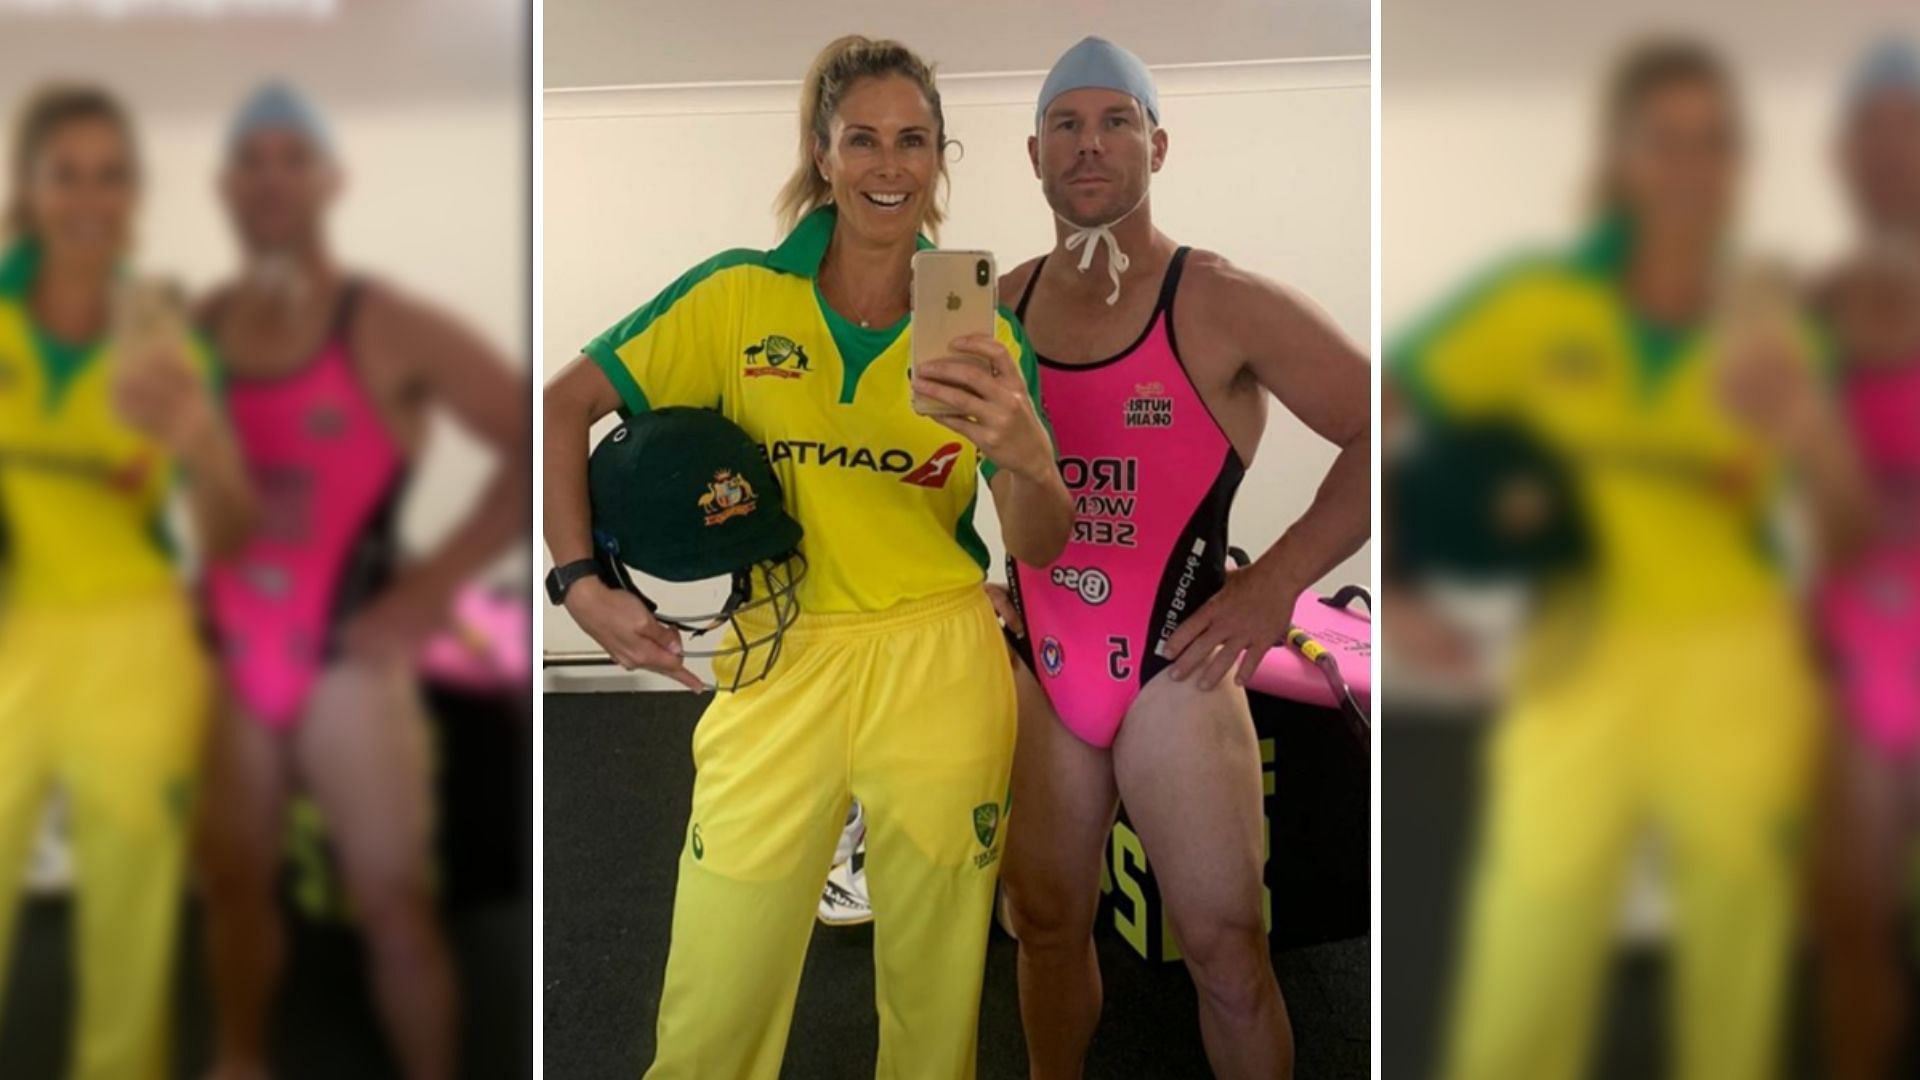 David Warner has his wife Candice are the unofficial winners of the #FlipTheSwitch challenge!